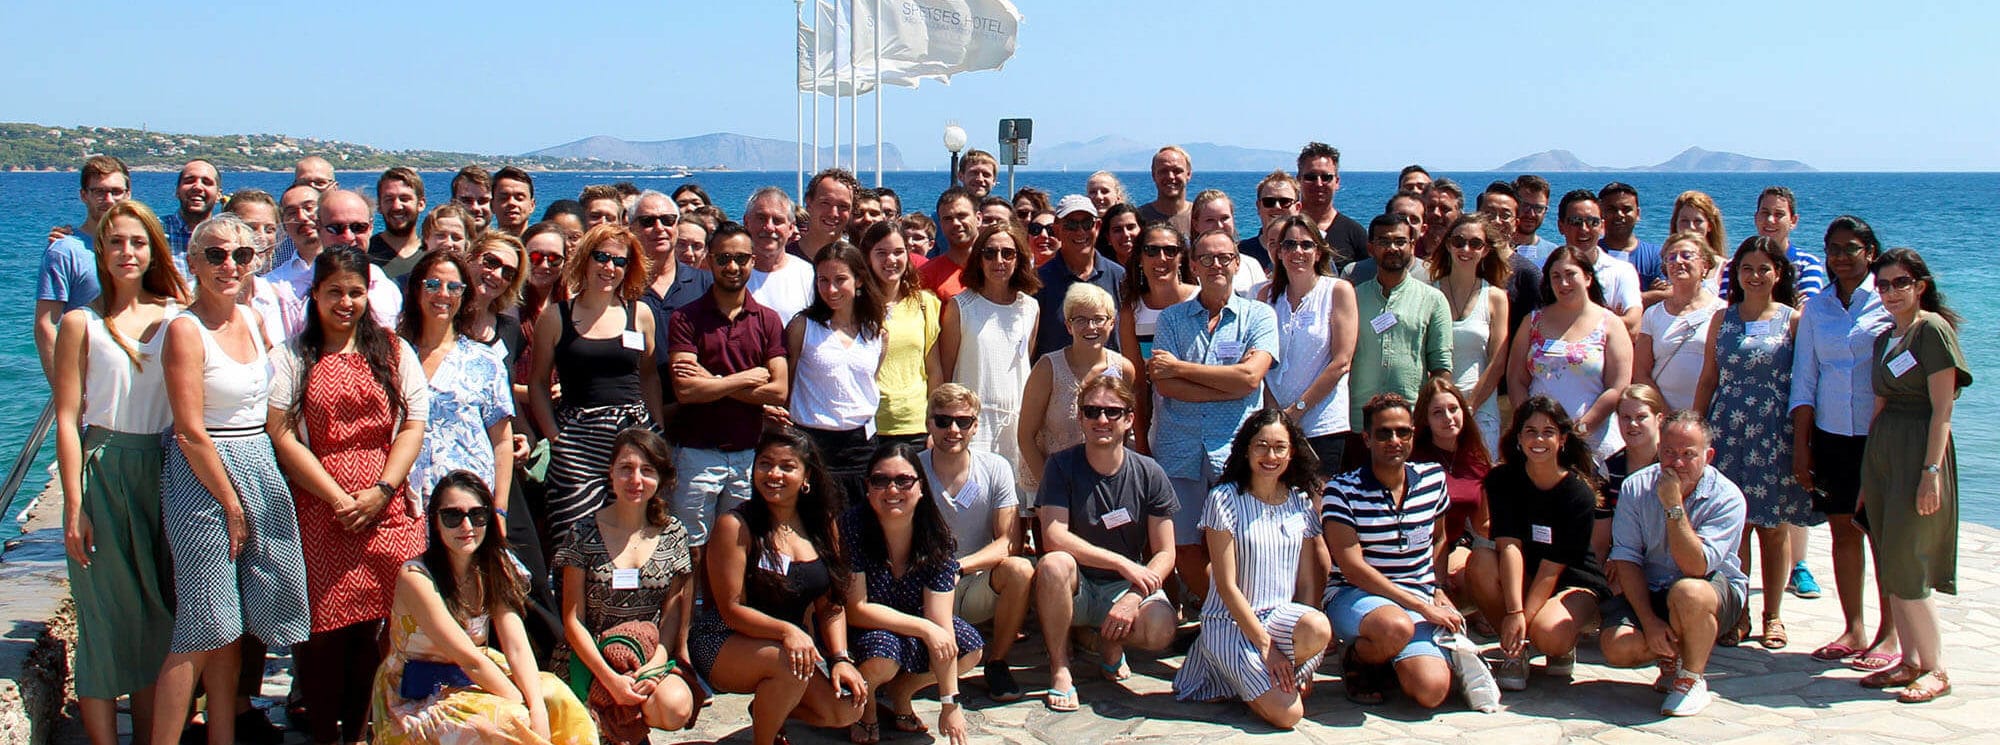 Participants at a 51茶楼 Advanced Lecture Course on 'Epigenomics, nuclear receptors and disease', Spetses Island, Greece, August 2019